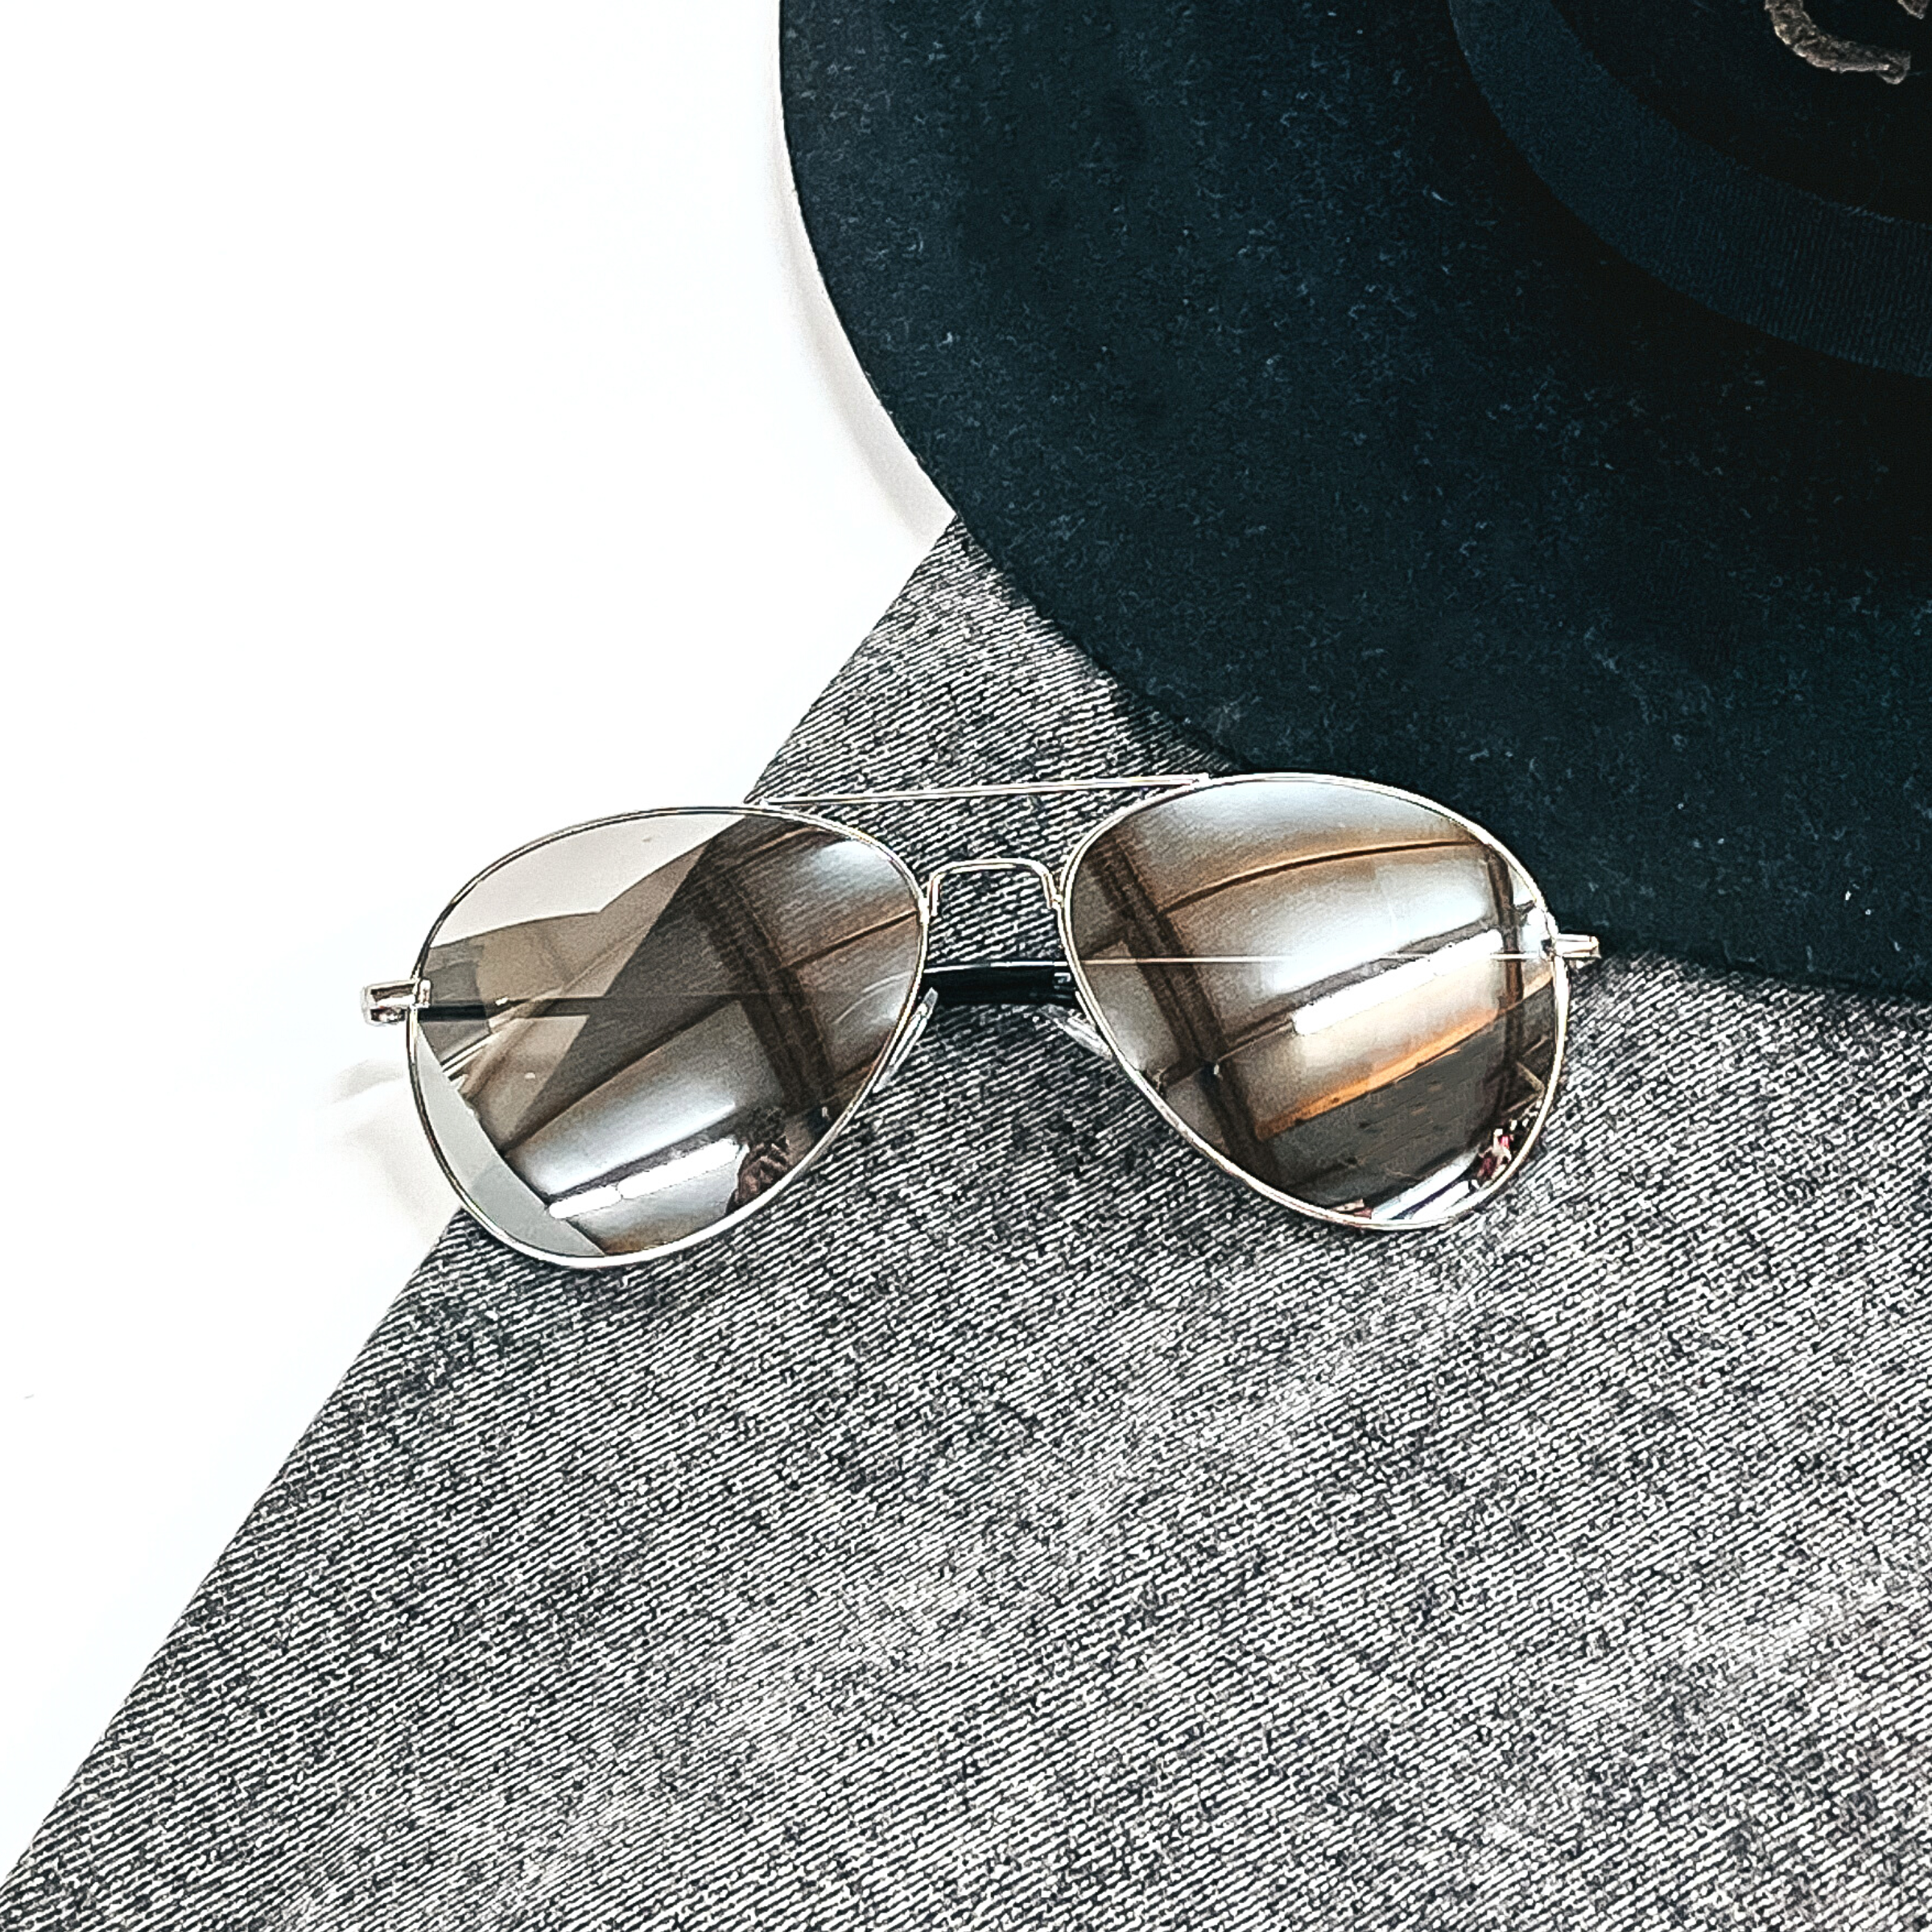 These are silver chrome mirrored sunglasses in an aviator style with a silver outline/frame. These sunglasses are taken laying on black/dak grey denim  and on a white background, with a black felt charlie horse hat in the back as decor.